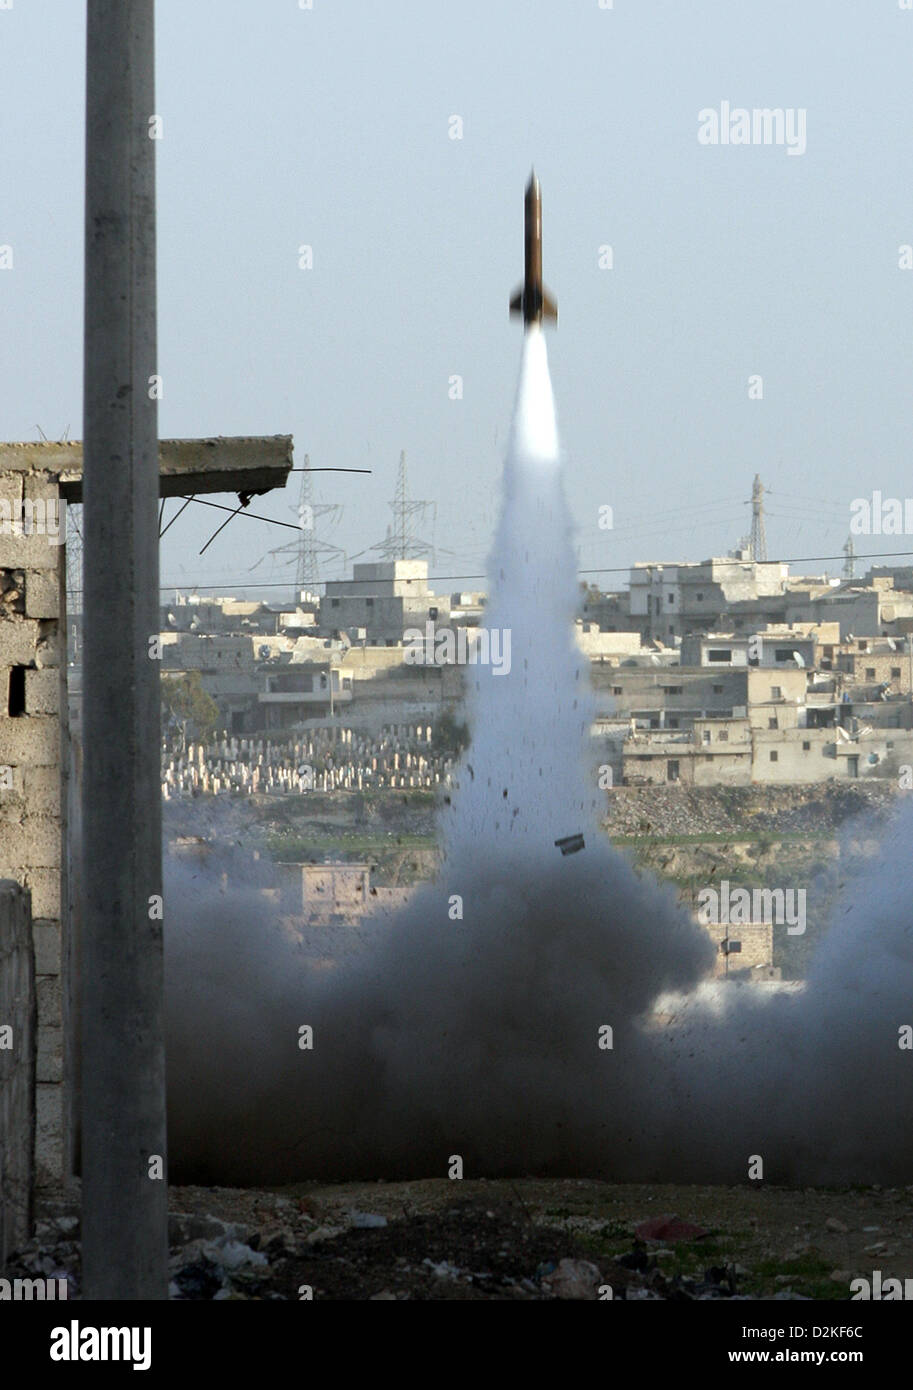 Aleppo, Syria. 27th Jan, 2013. Members of the Free Syrian Army (FSA) launch a self-build rocket after taking control of the area and trying to defence against a counter-attack in a southern area of Aleppo, Syria, 27 January 2013. The southern region of Aleppo is of strategic importance, because the last connection between the airport and the west part of the city runs through the area. Both regions are still controlled by Assad's government troops while the rest of the area is under control of the FSA.   Photo: THOMAS RASSLOFF Stock Photo